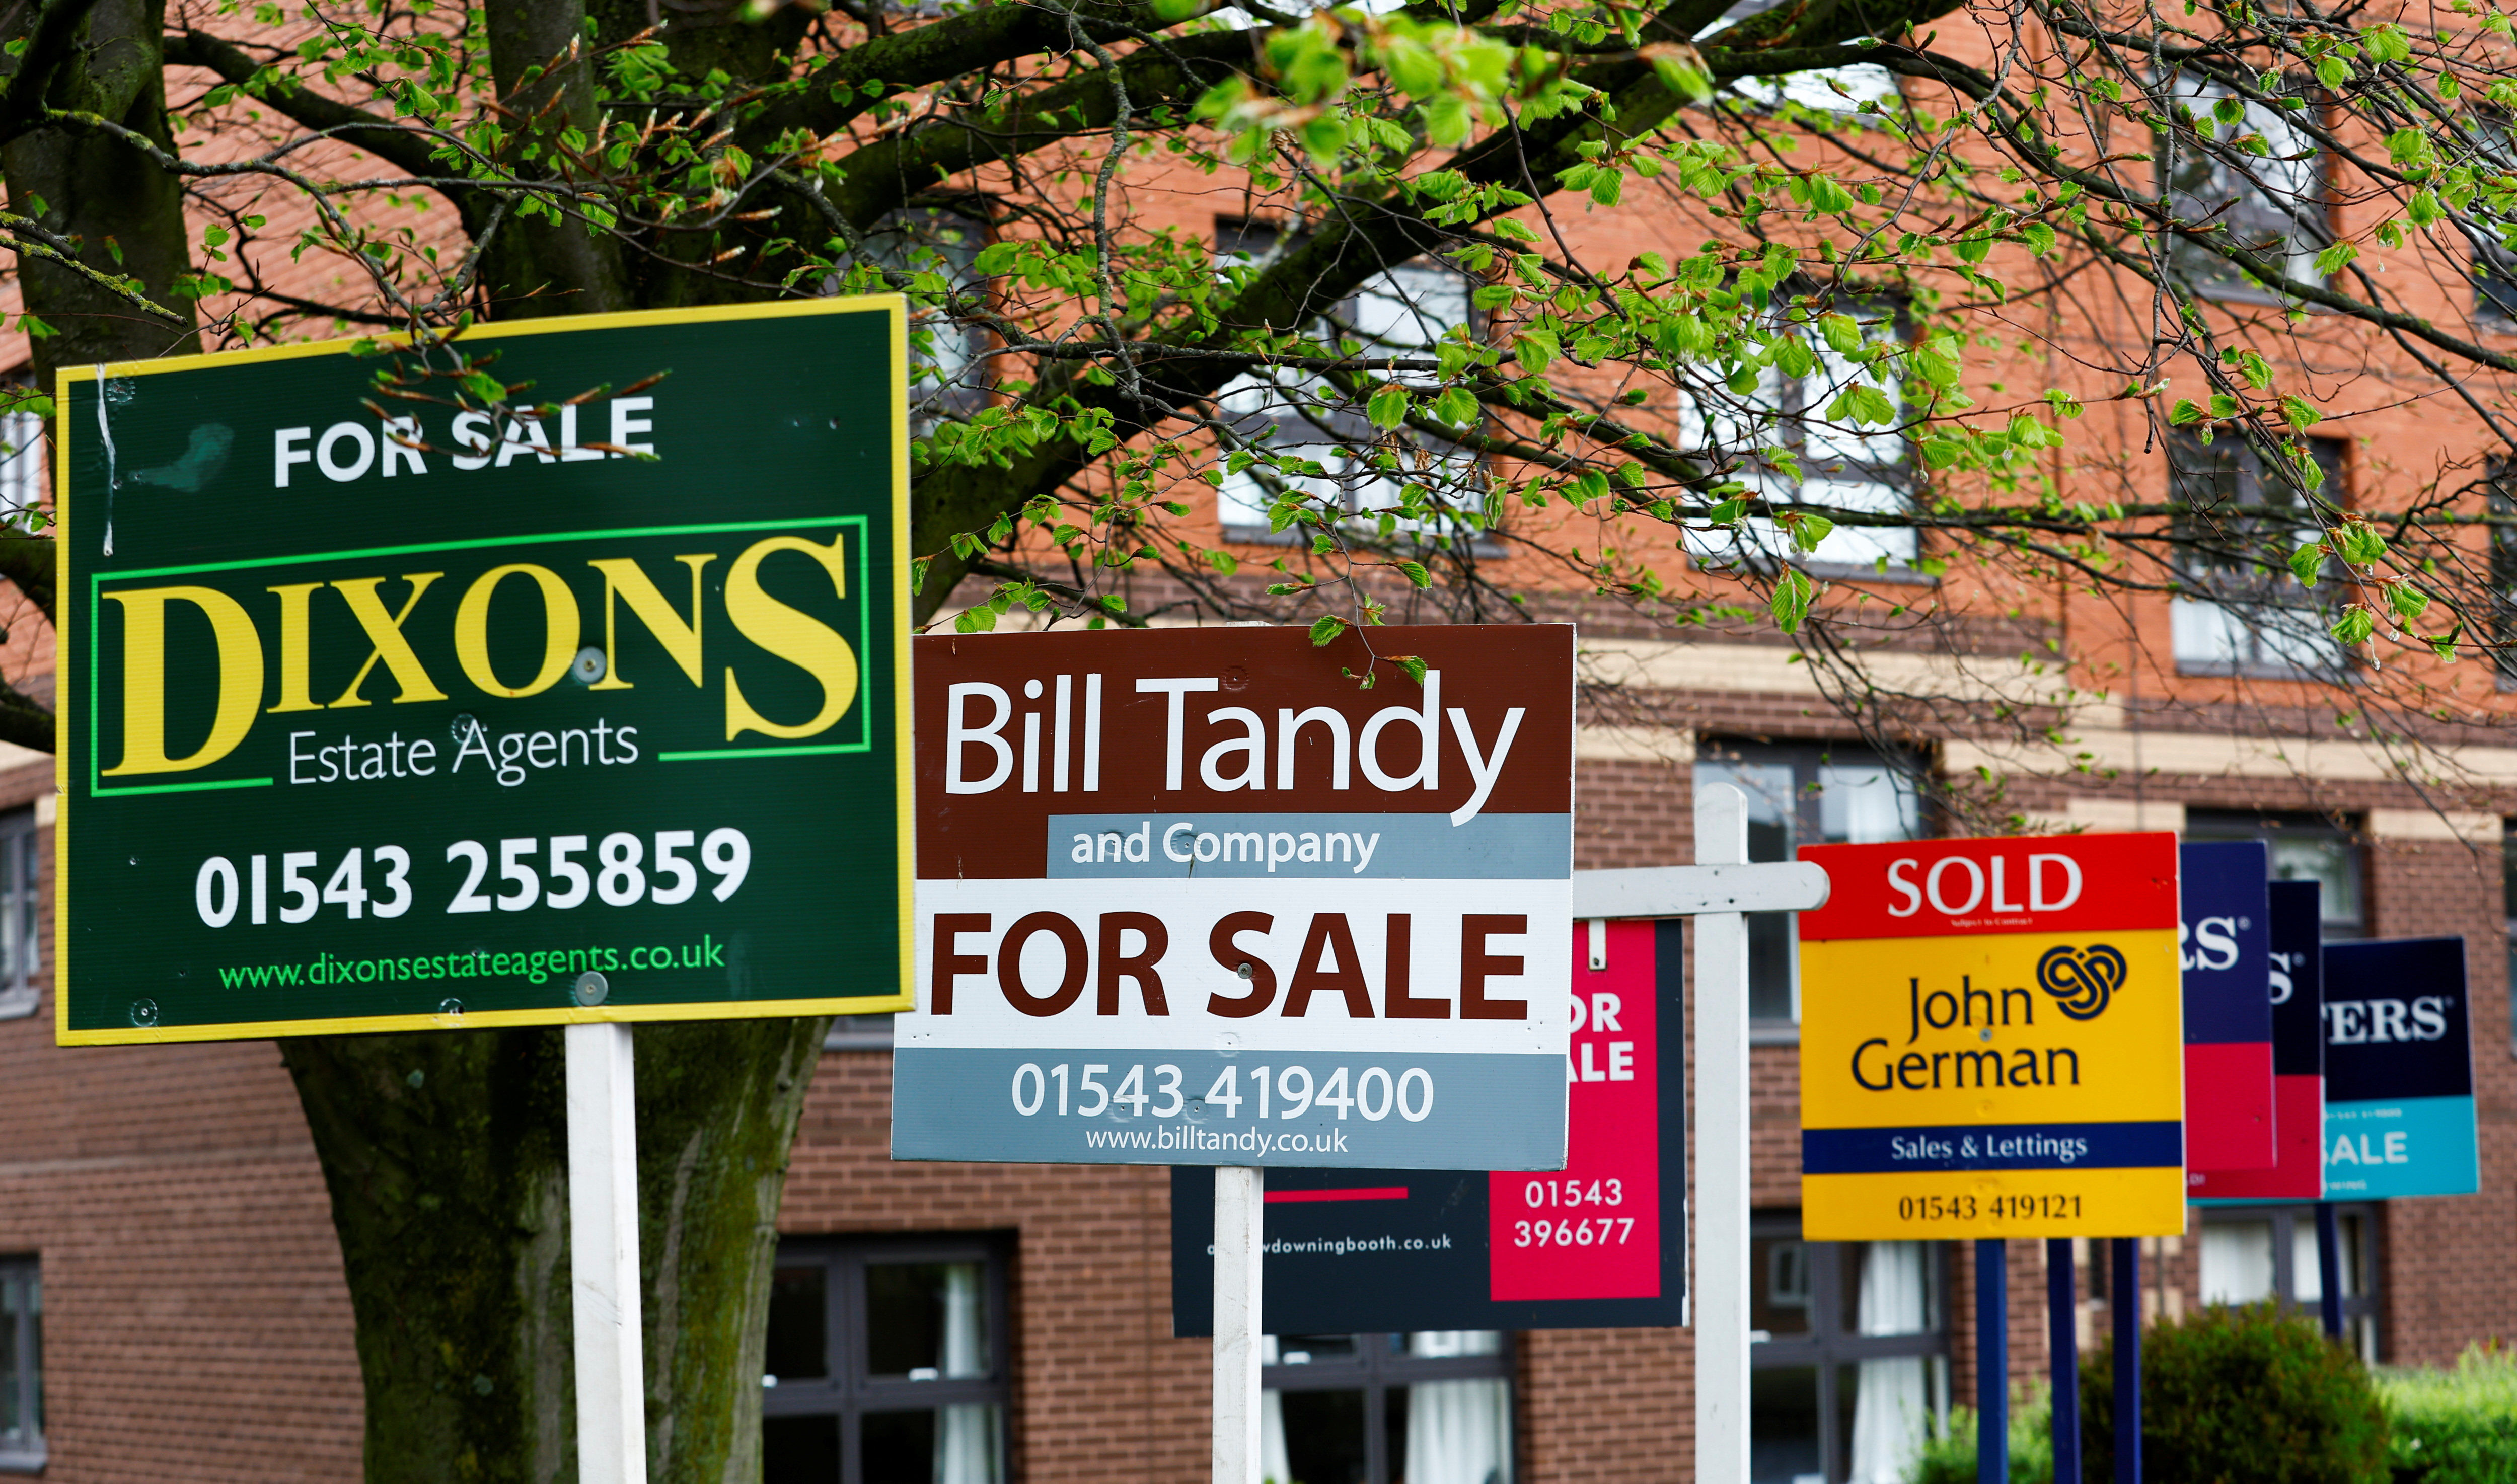 Property estate agent sales and letting signs are seen outside an apartment building